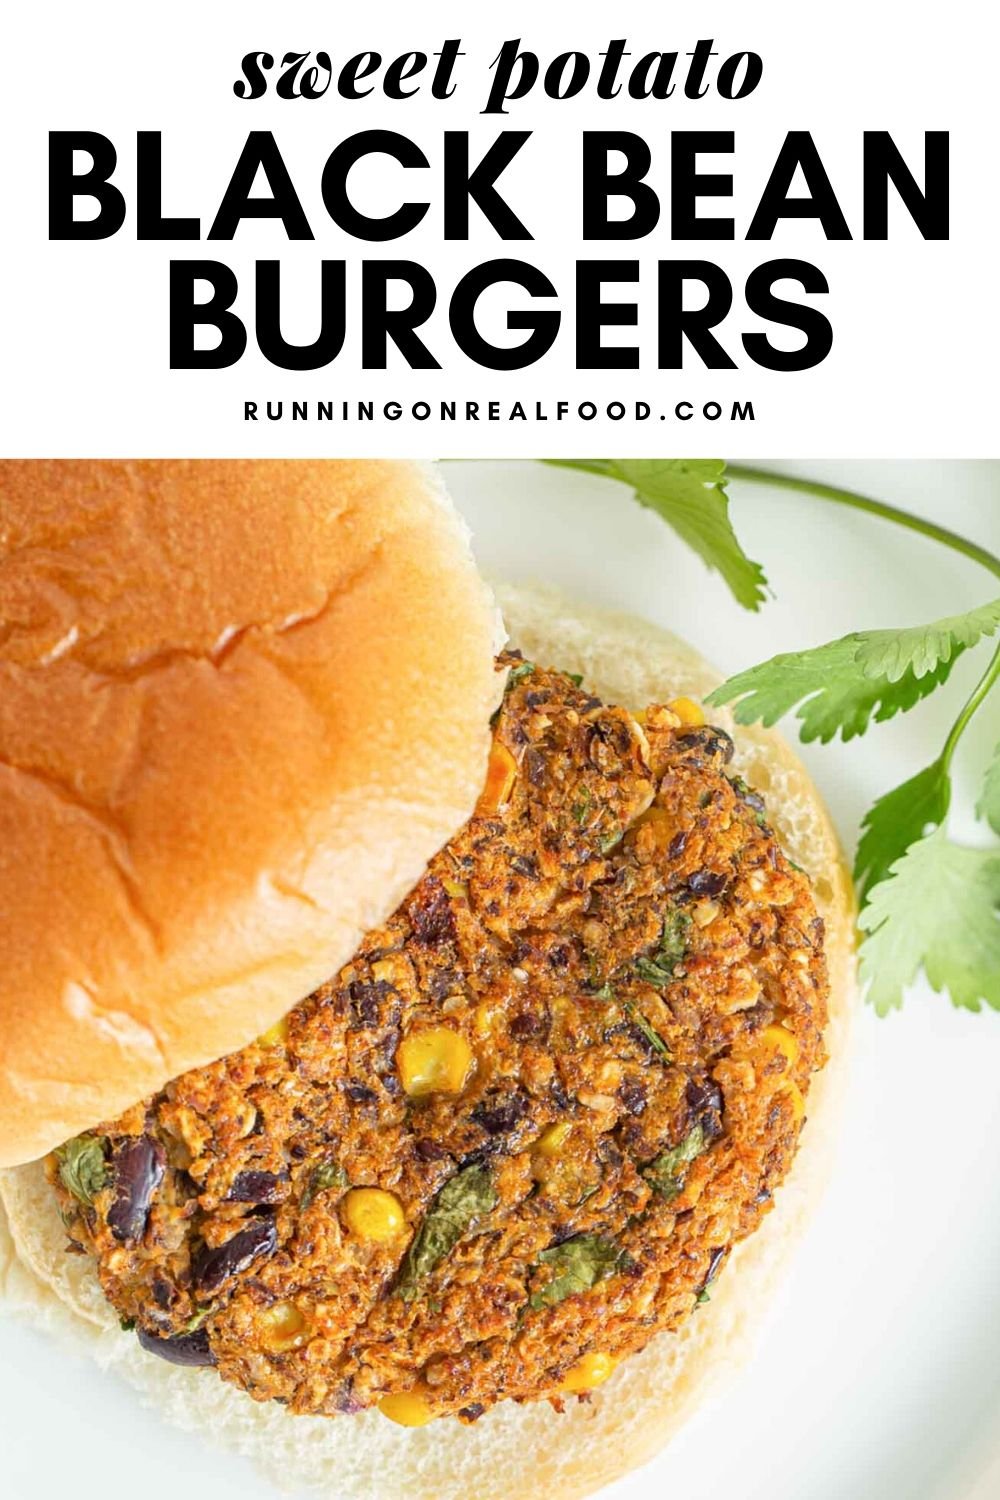 Pinterest graphic with an image and text for sweet potato black bean burgers.